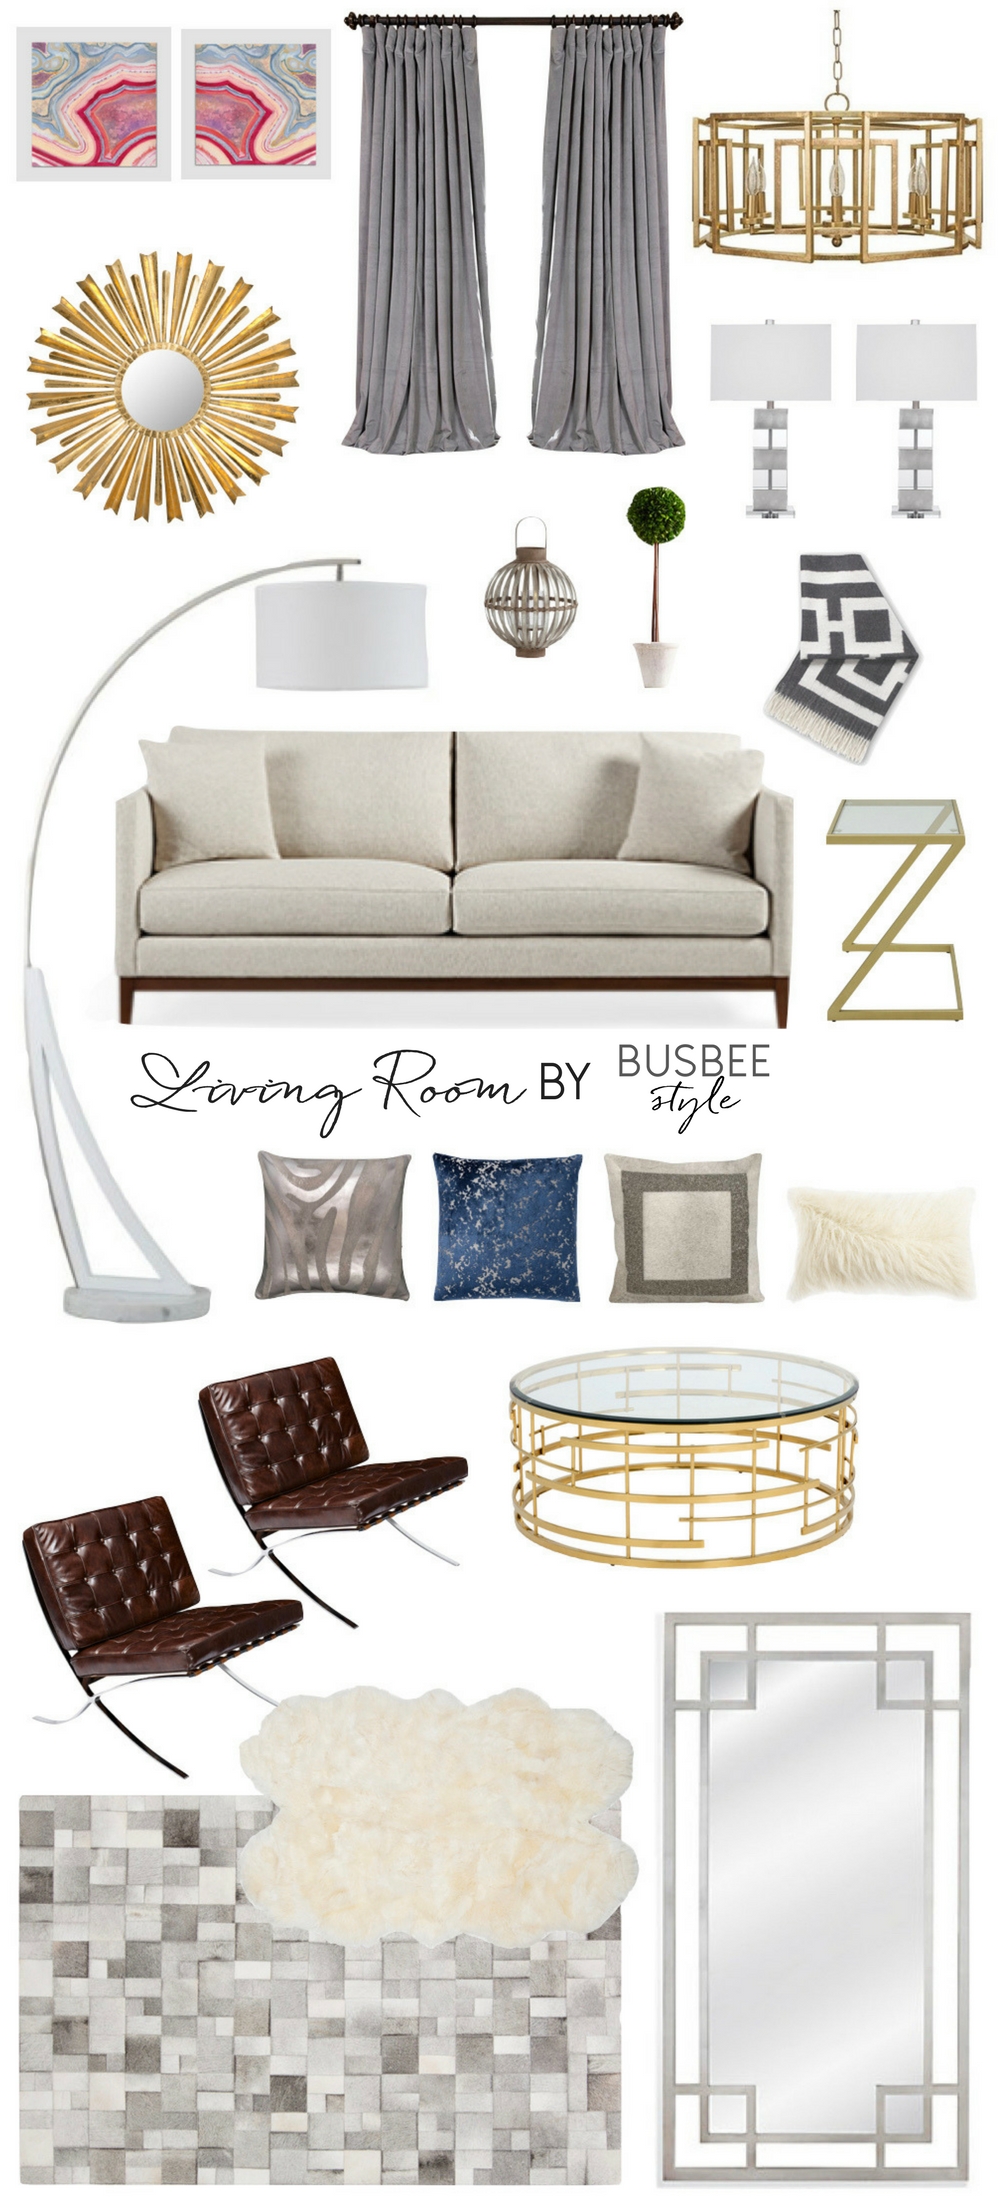 Living Room decor inspiration, by lifestyle blogger erin busbee of busbee style, including pieces from west elm, gilt, arhaus, pottery barn, mayfair, amazon